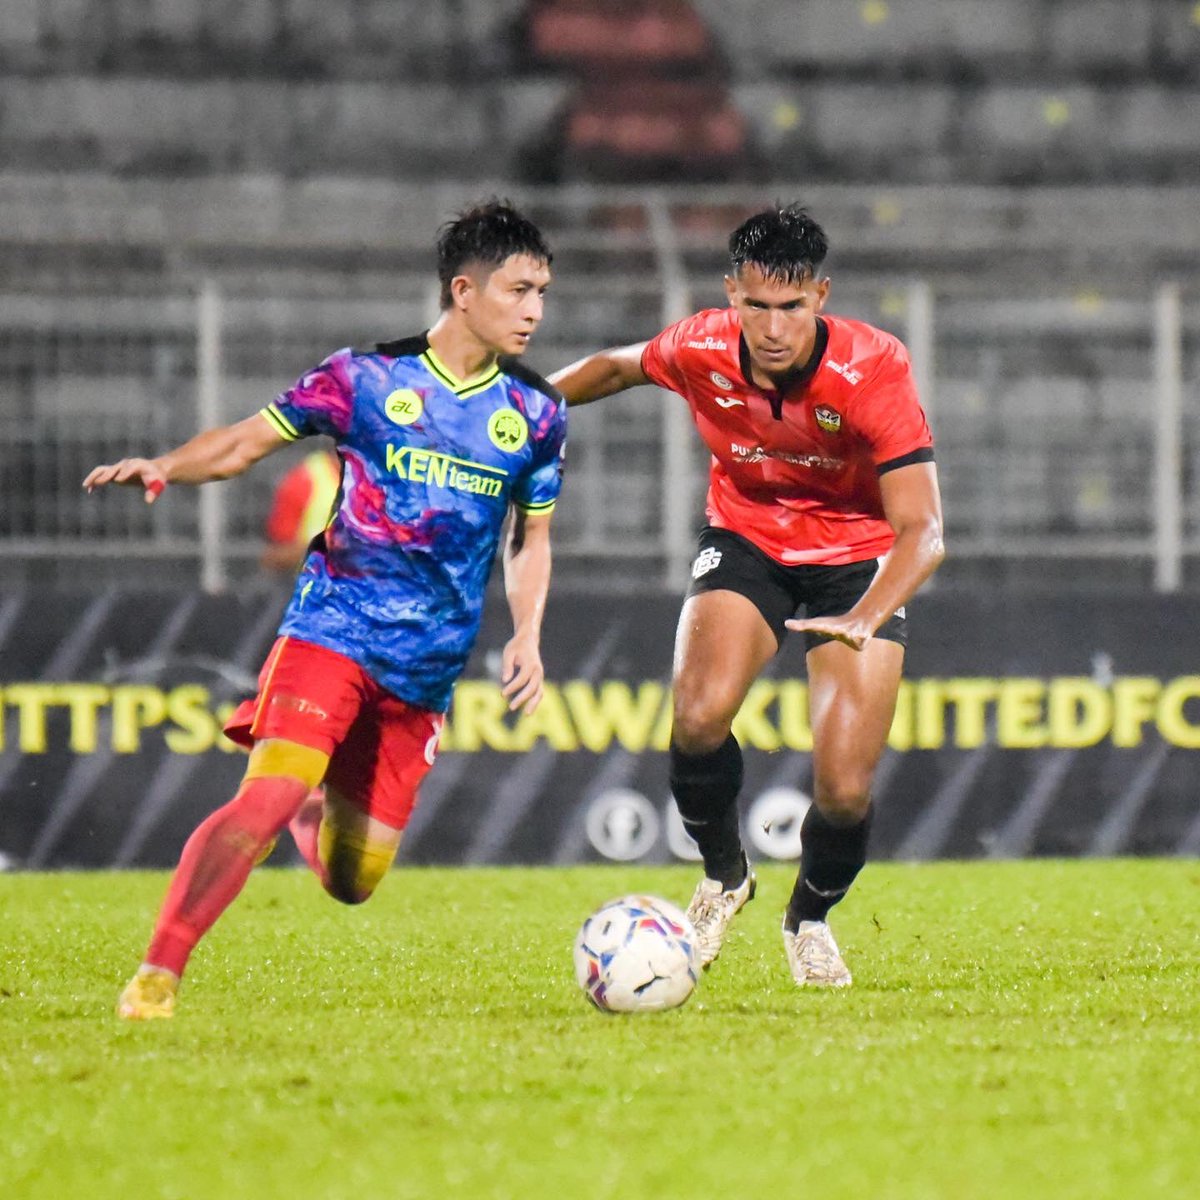 Ending #LigaSuper2022 with a win. Onto ➡️ Malaysia Cup 🏆.